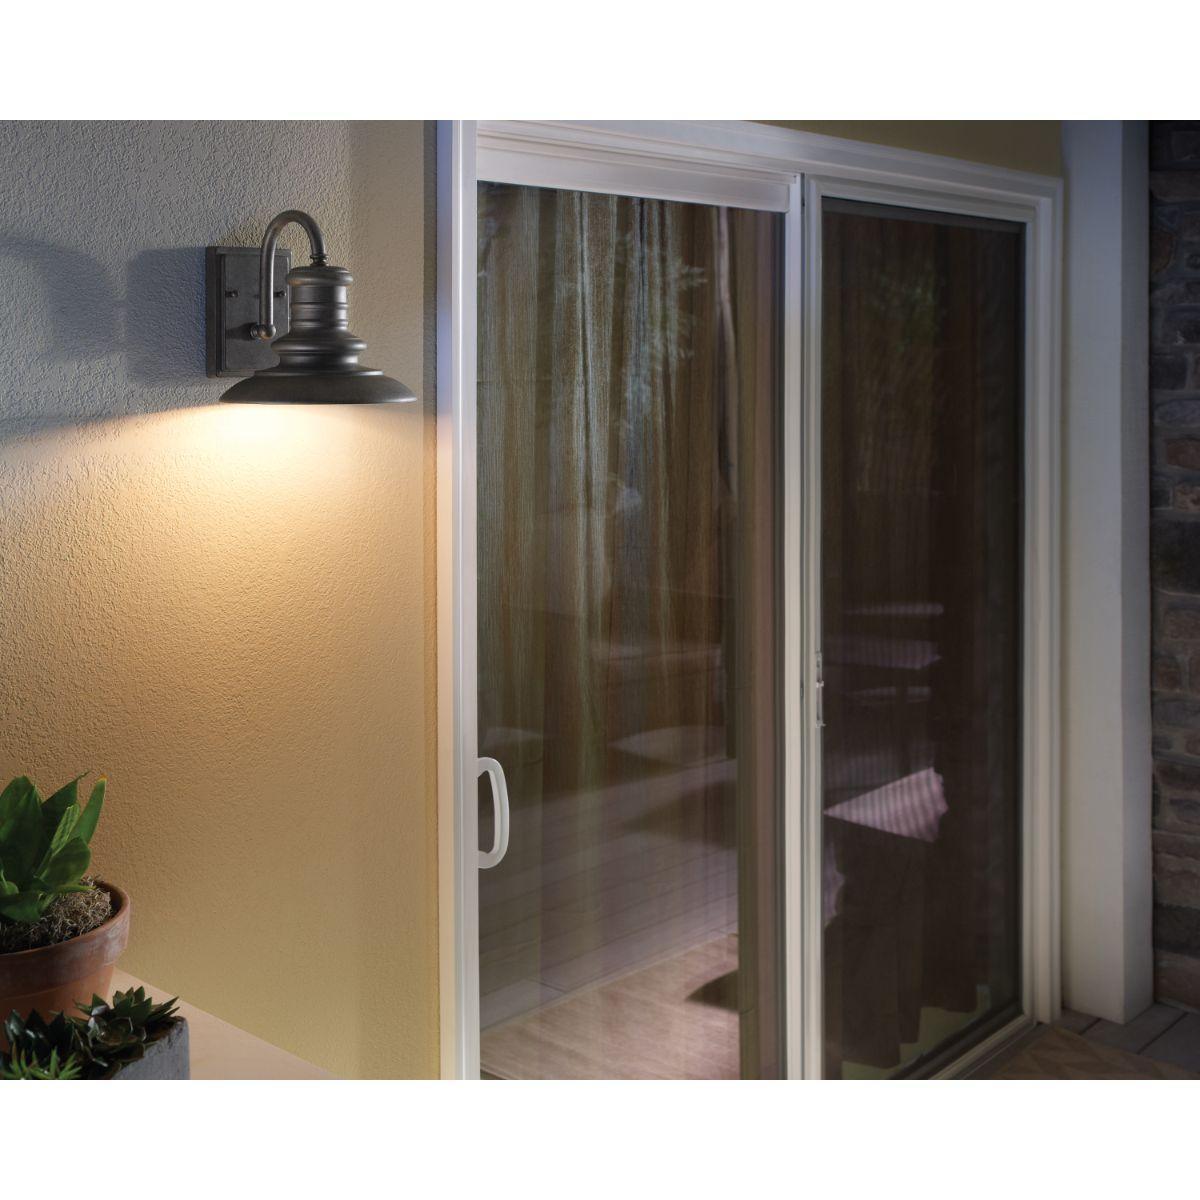 Redding Station 10 In. LED Outdoor Wall Sconce